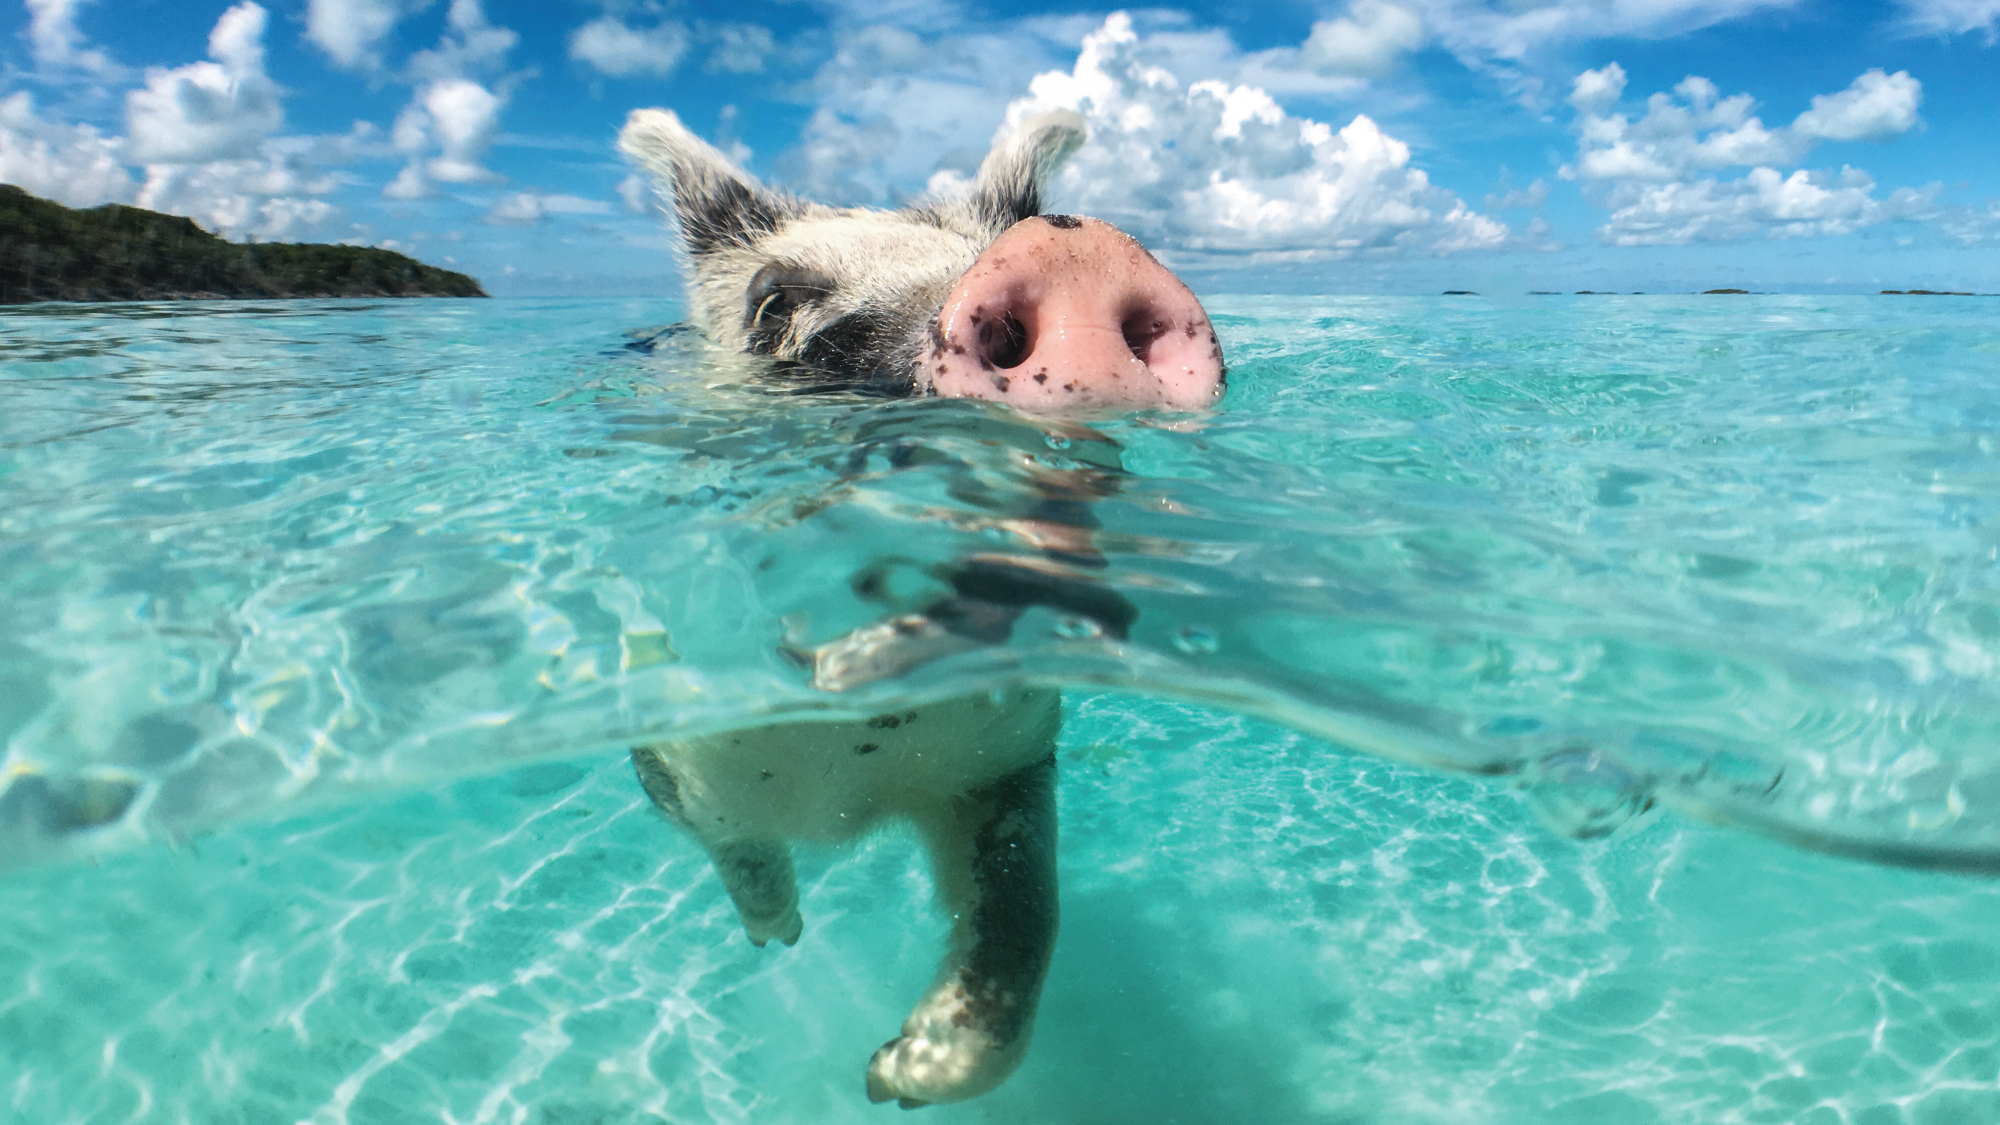 A playful pig swimming in the crystal-clear waters of Cat Island, Bahamas, offering a unique sight for self-flying pilots exploring this tropical paradise